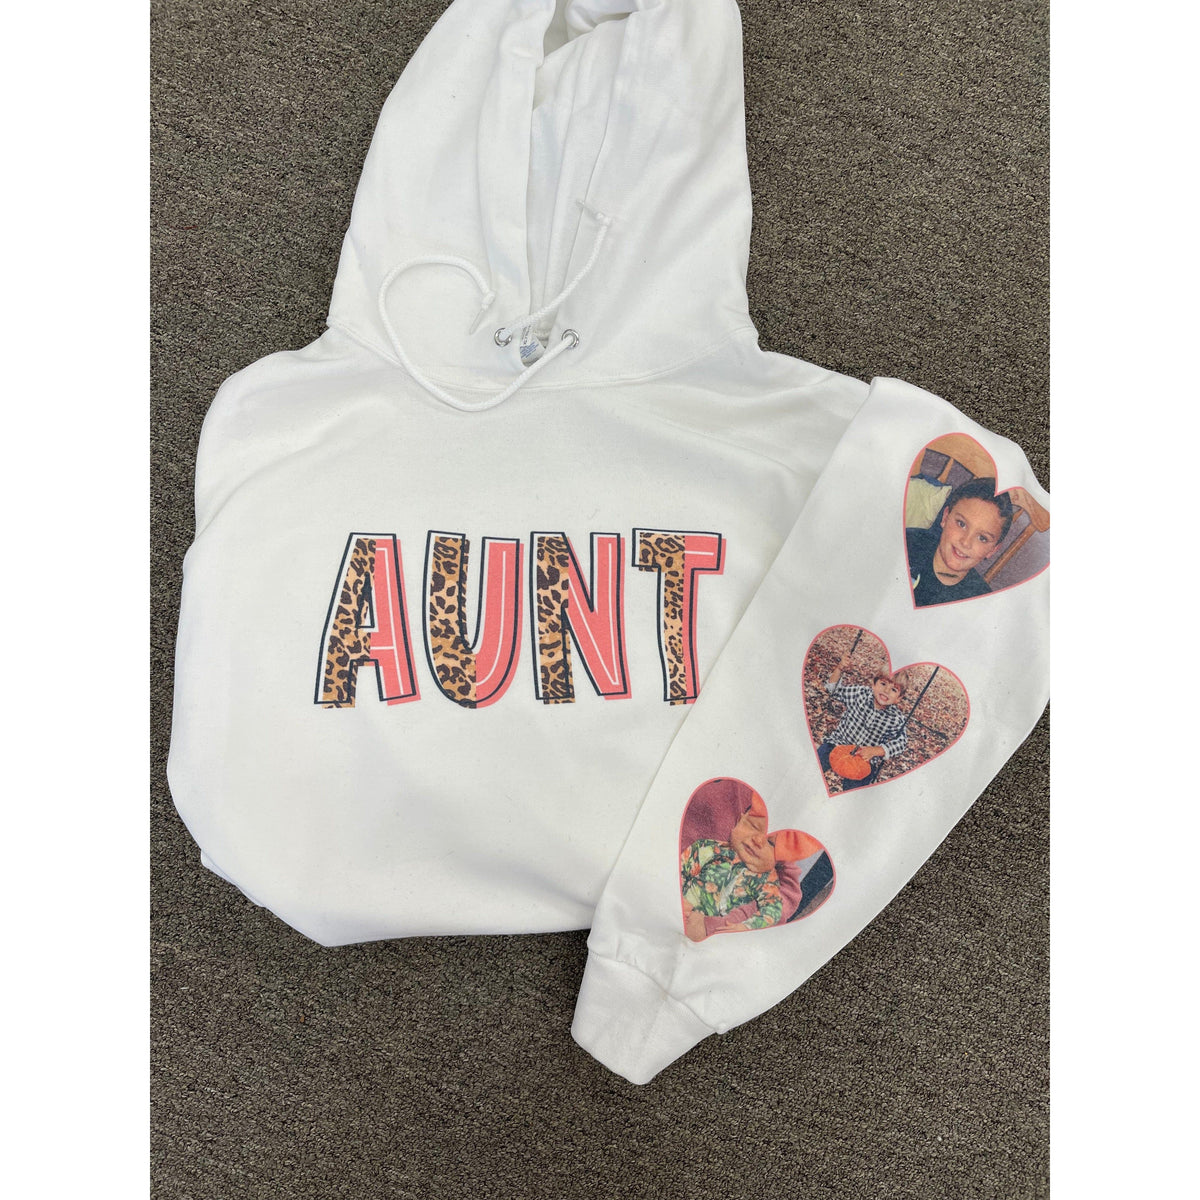 Mama (Aunt or Custom) Sweatshirt, Long Sleeve with Pictures